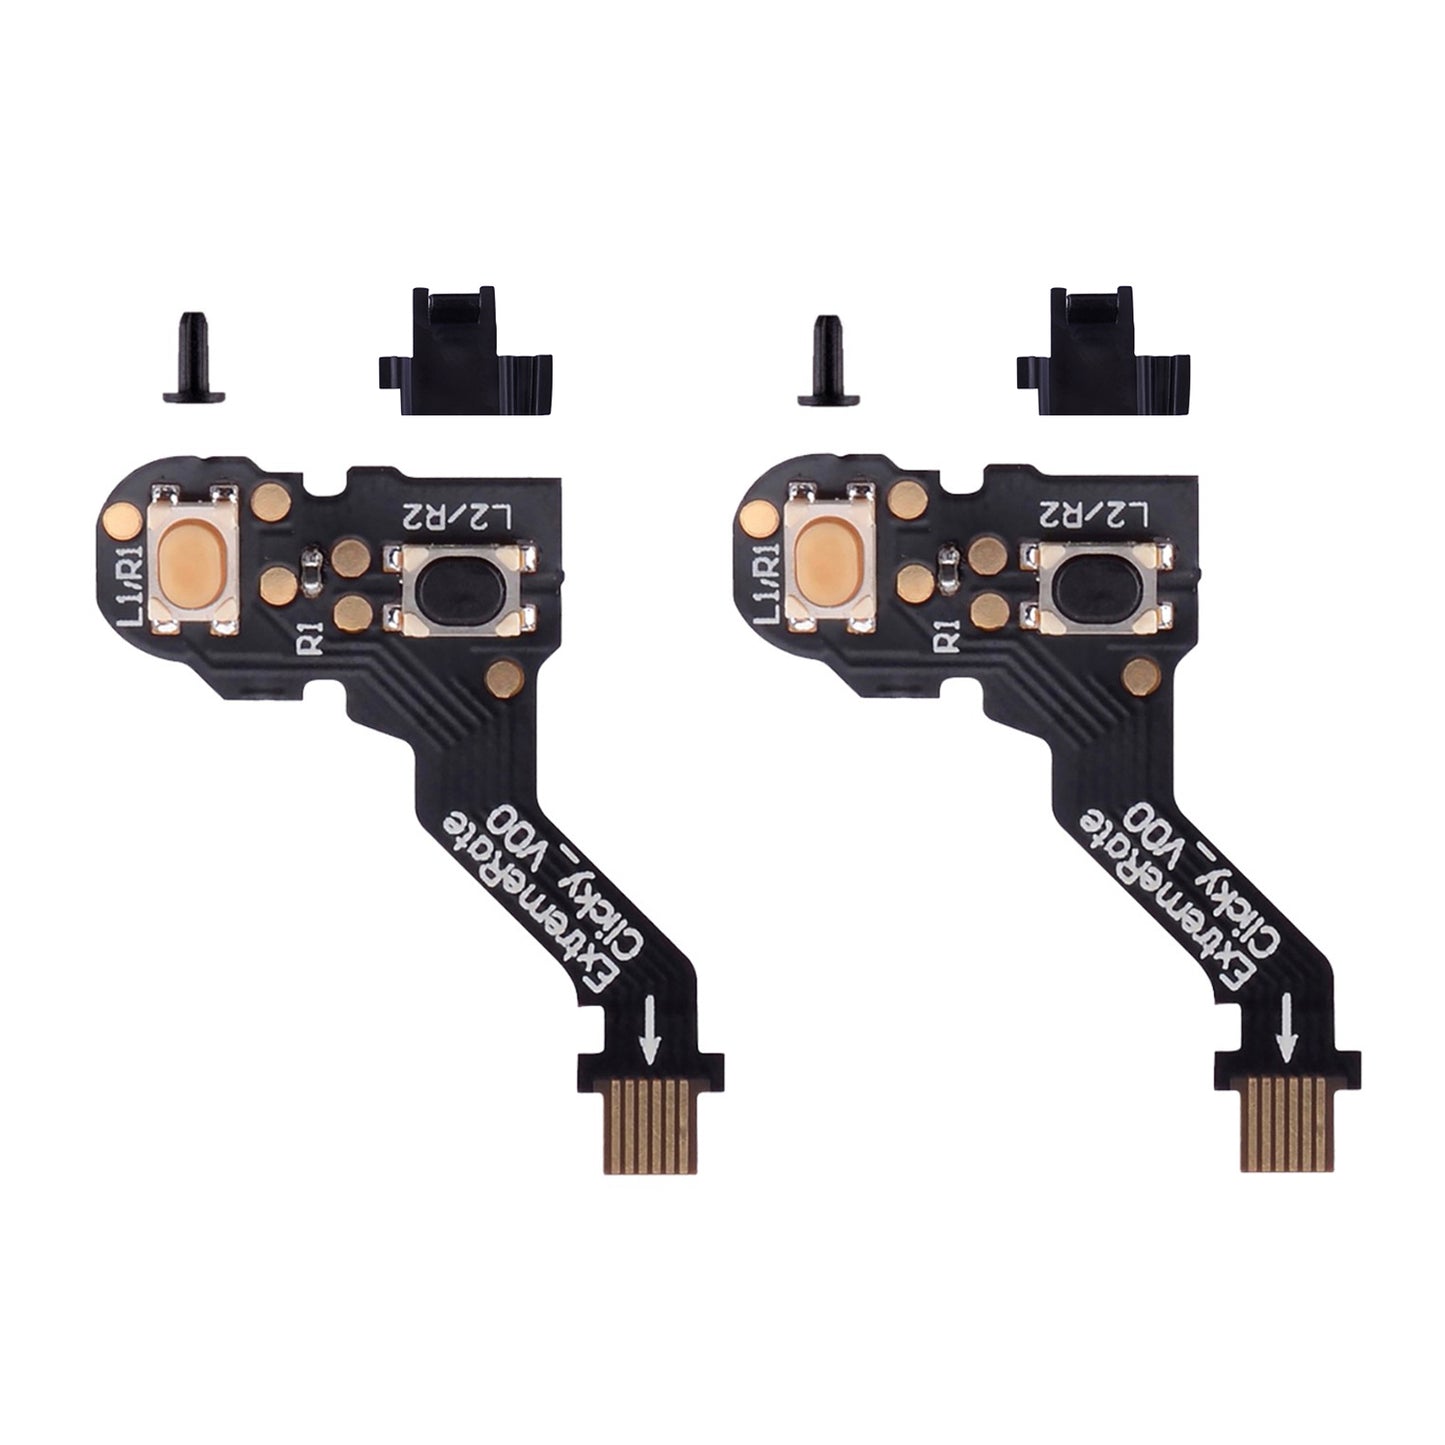 Clicky Hair Trigger Kit for ps5 Controller BDM-010 & BDM-020 Shoulder Buttons, Custom Flashshot Trigger Stop Flex Cable for ps5 Controller - Controller NOT Included - PFMD004 eXtremeRate